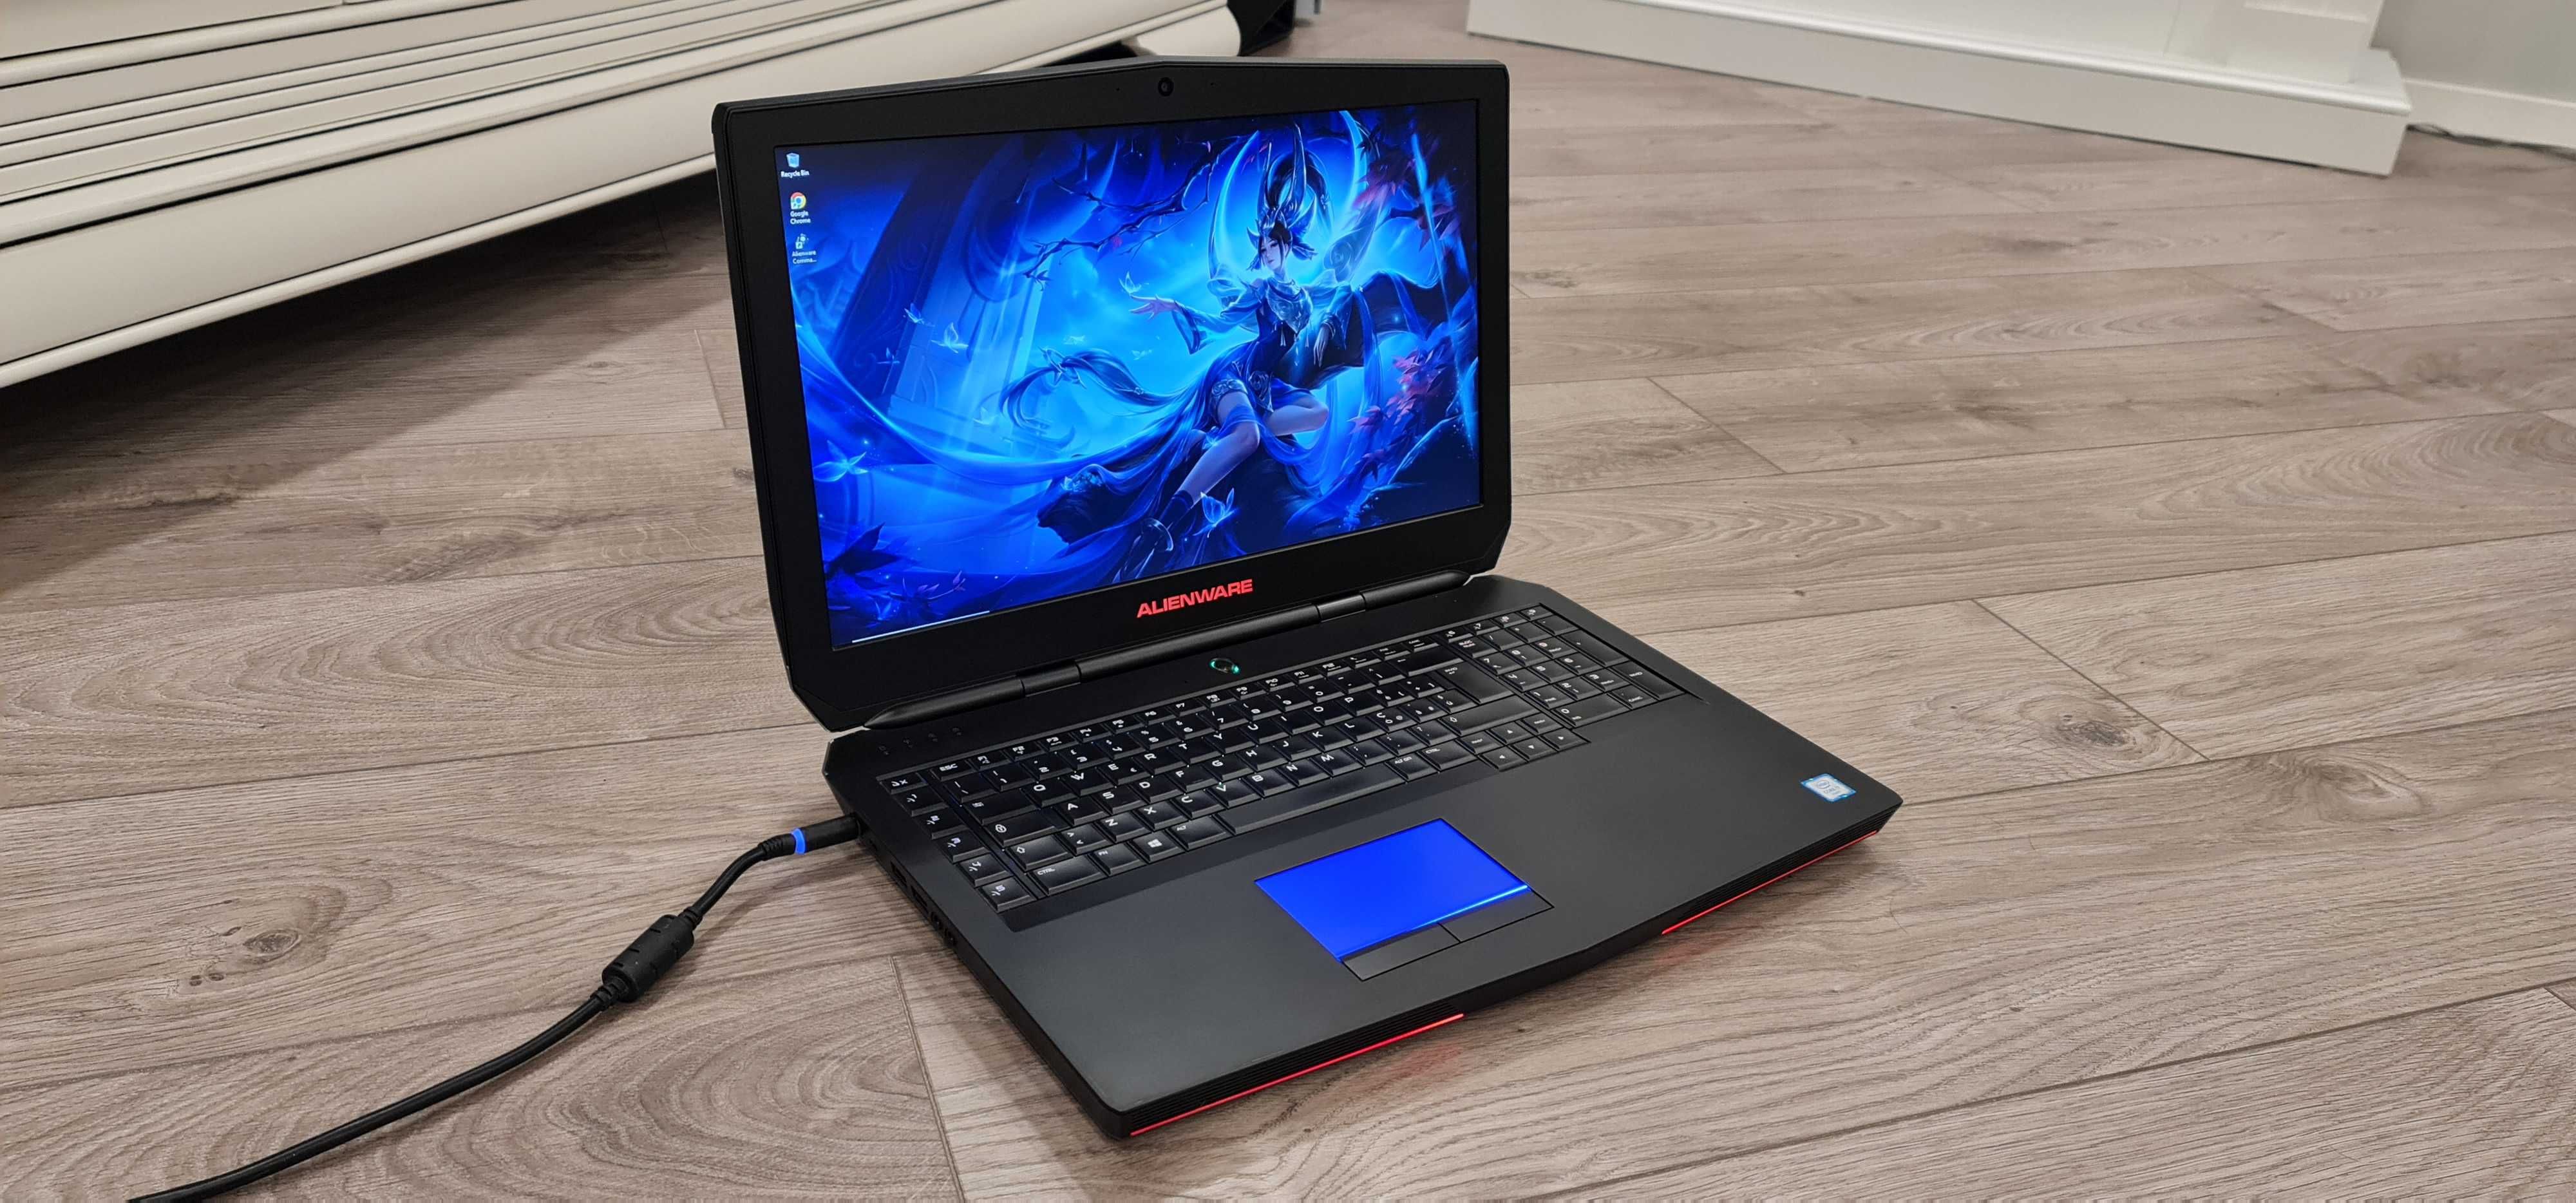 Laptop gaming alienware ,intel core i7- ,video 8 , 17,3 inch, defect